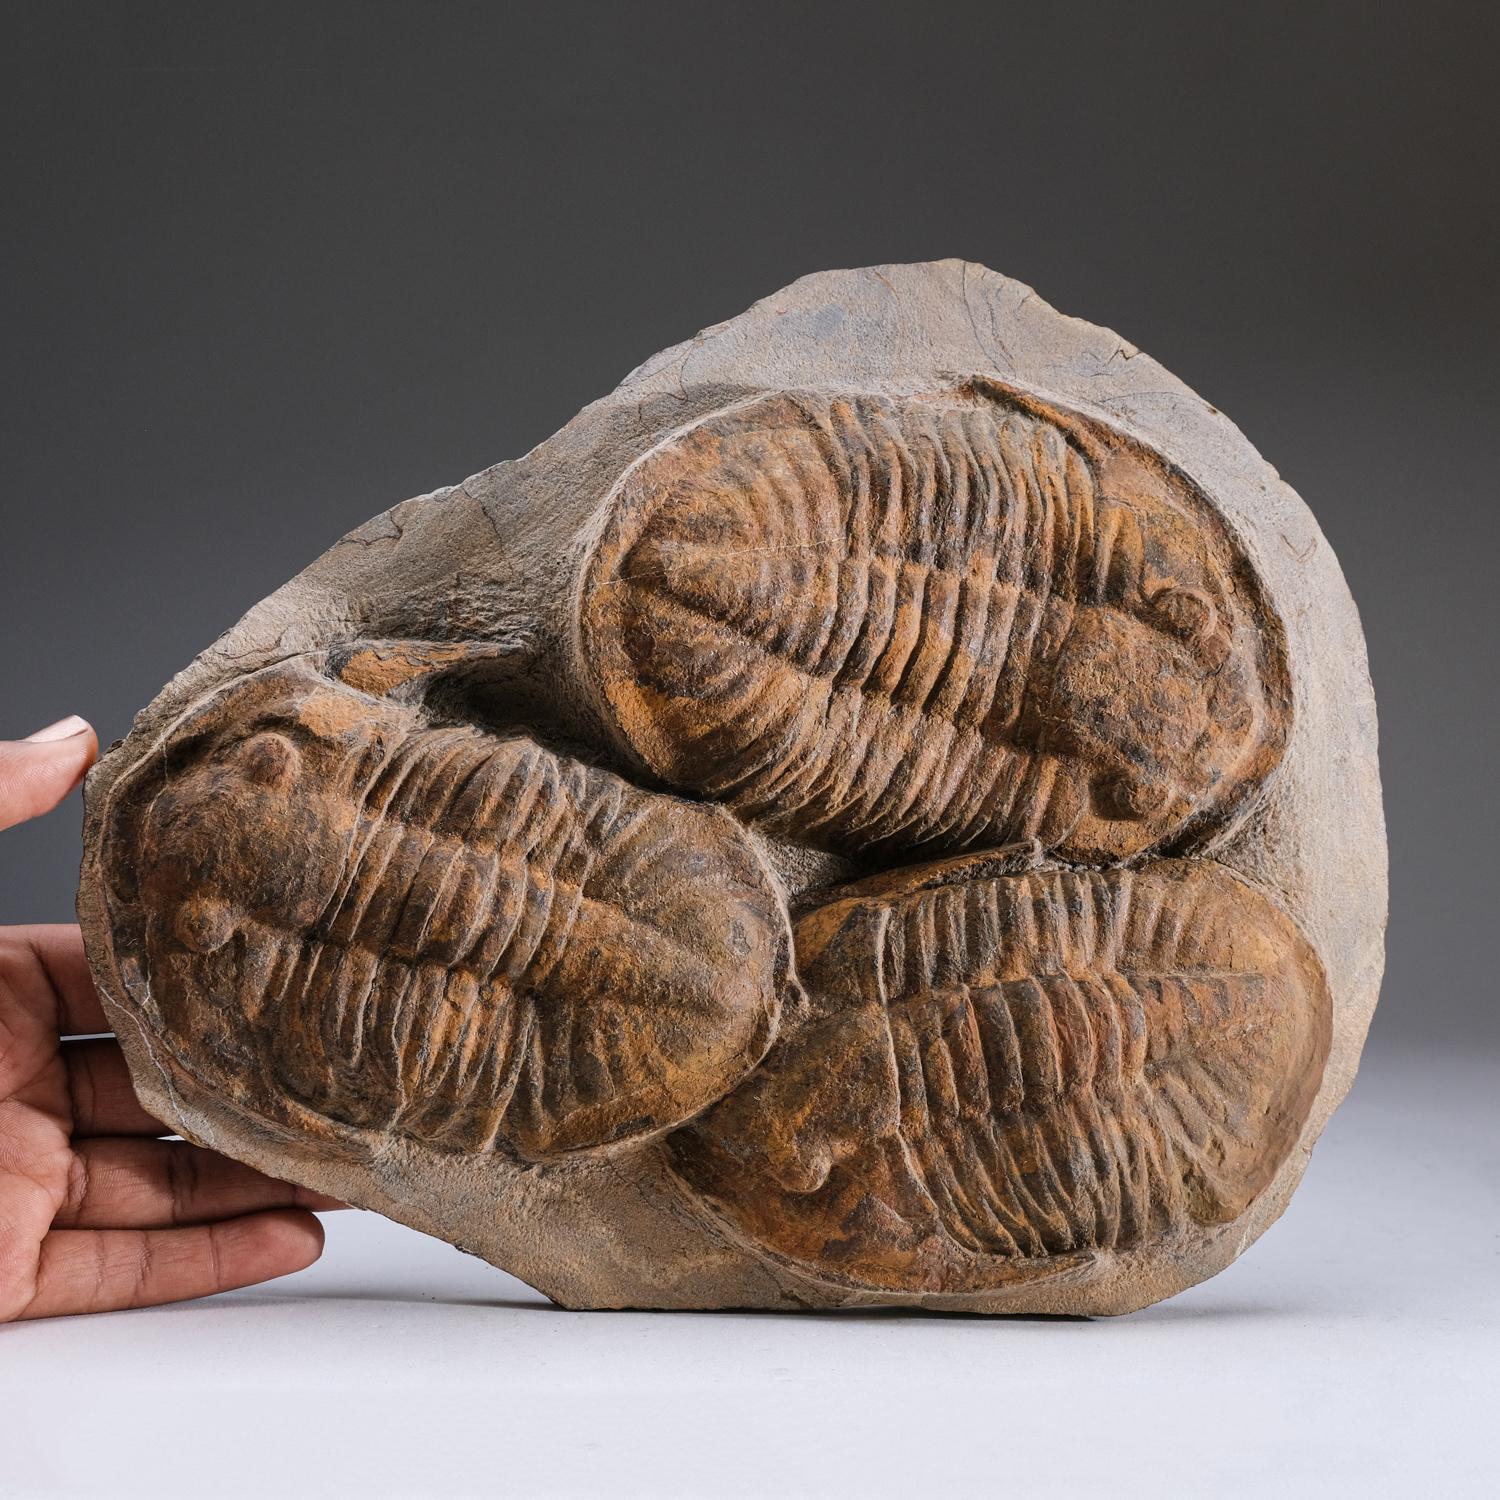 Ptychopariida is a large, heterogeneous order of trilobite containing some of the most primitive species known. The earliest species occurred in the second half of the Lower Cambrian period. This fossil features three Trilobites that have facial